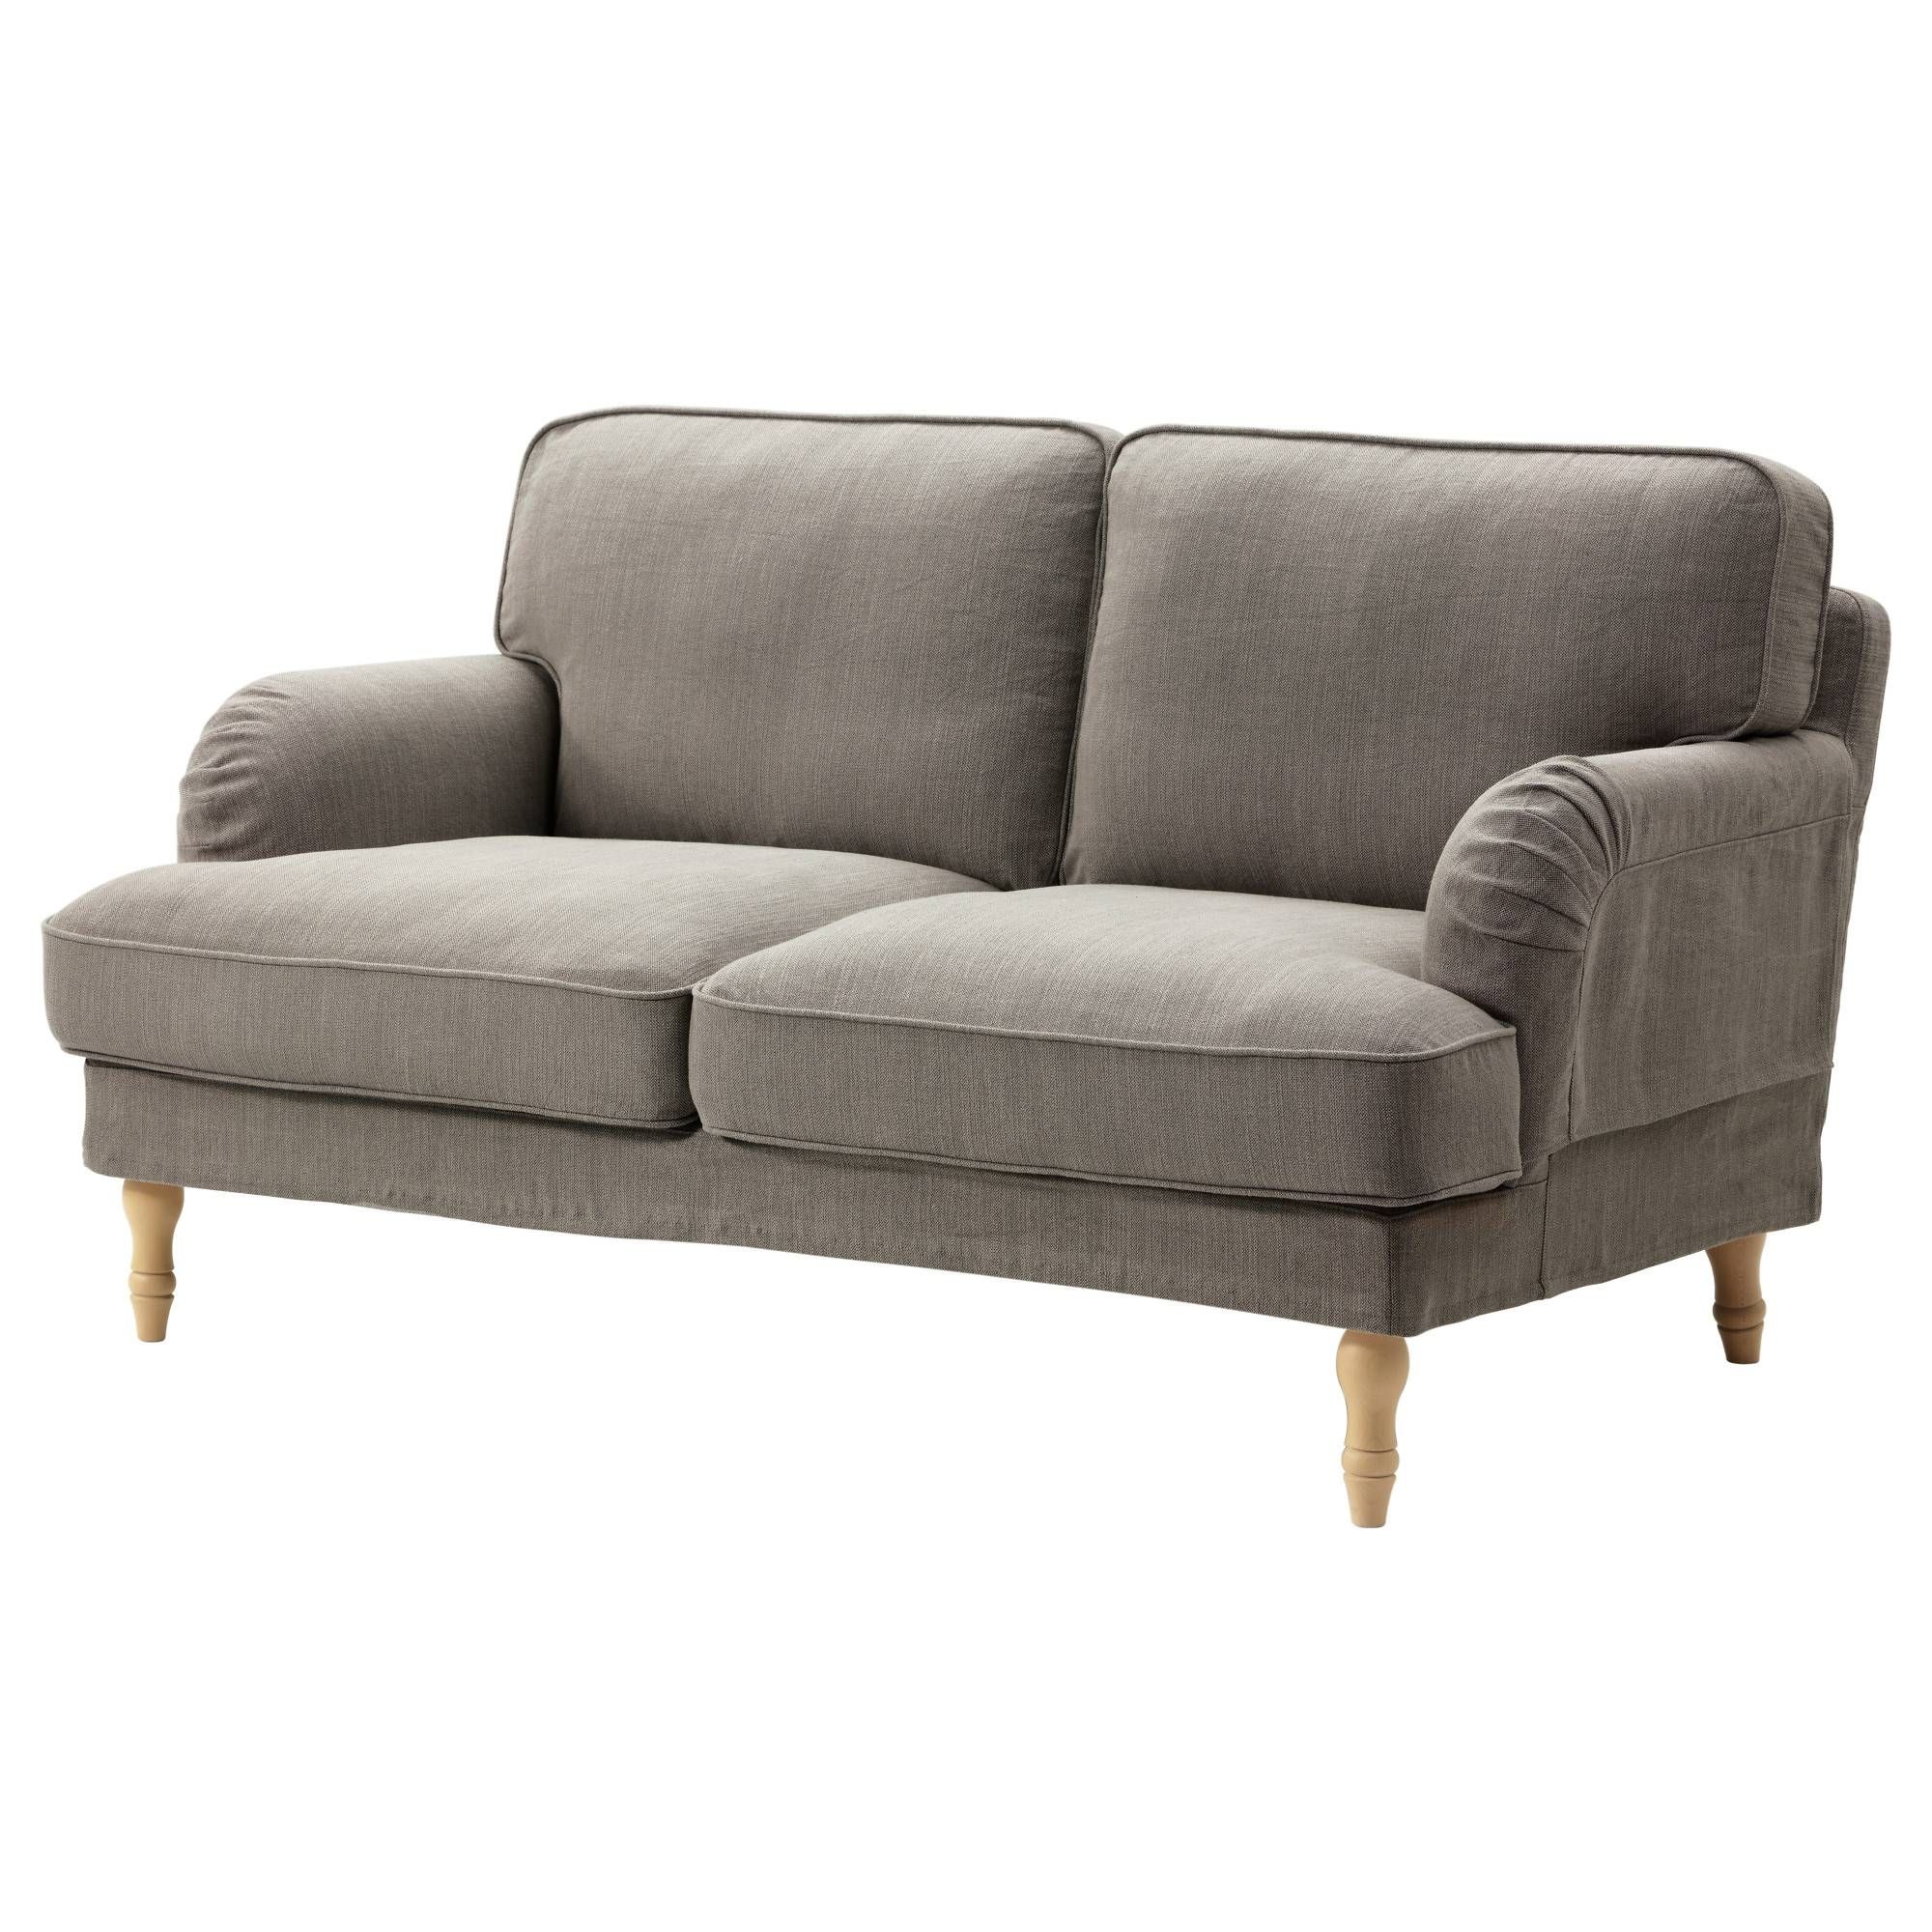 Fabric Loveseats – Ikea Within Small Sofas Ikea (View 9 of 30)